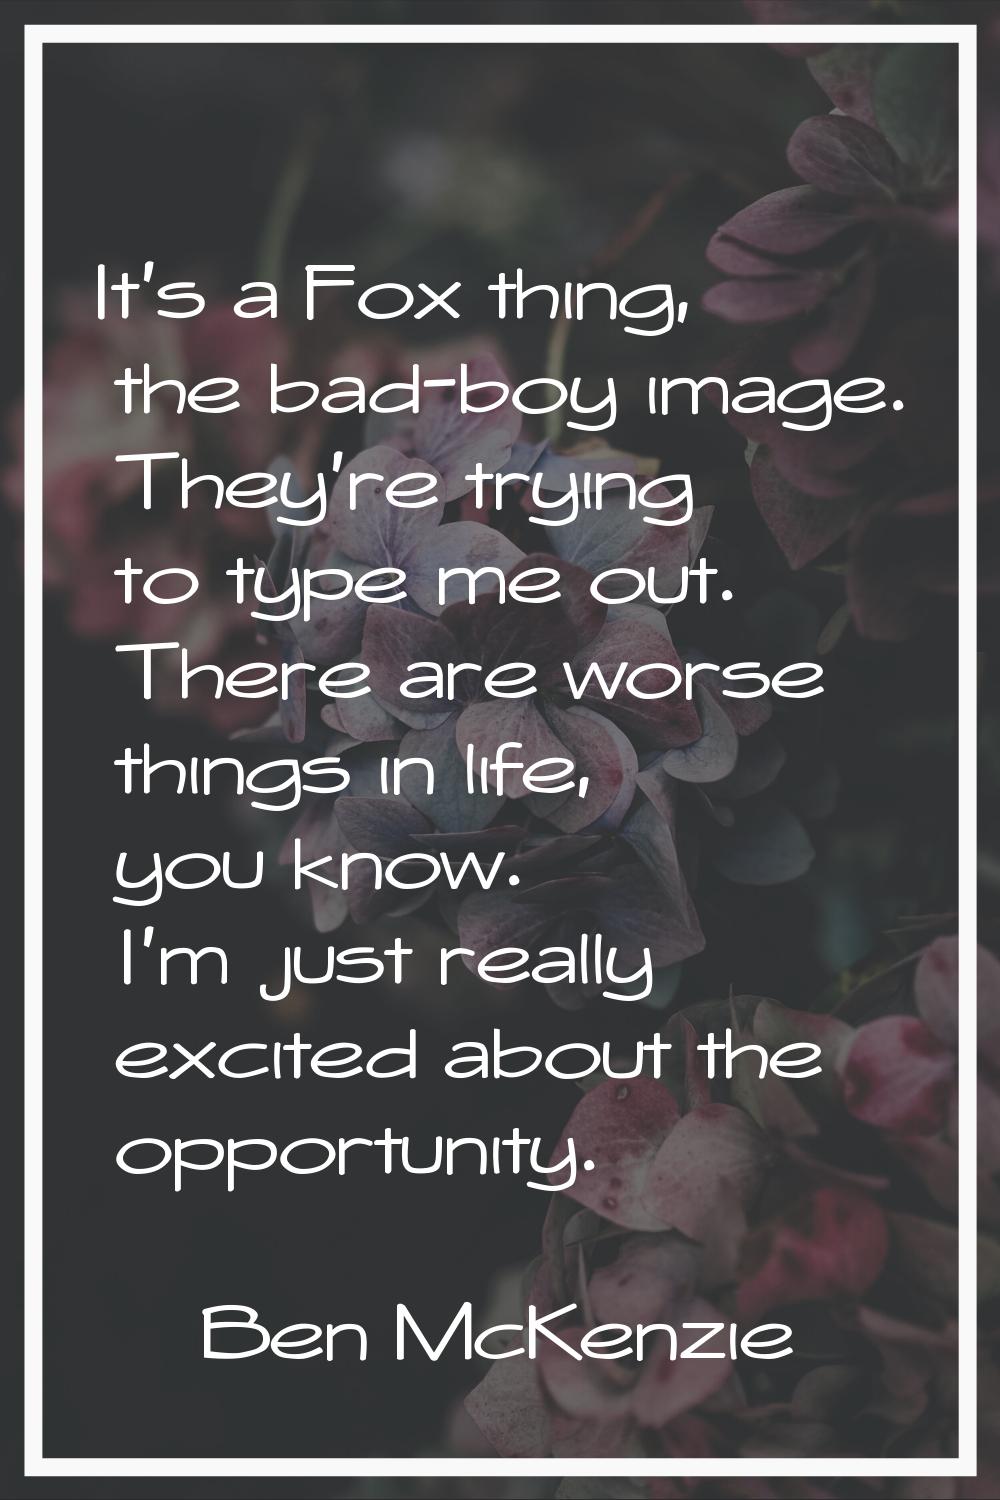 It's a Fox thing, the bad-boy image. They're trying to type me out. There are worse things in life,